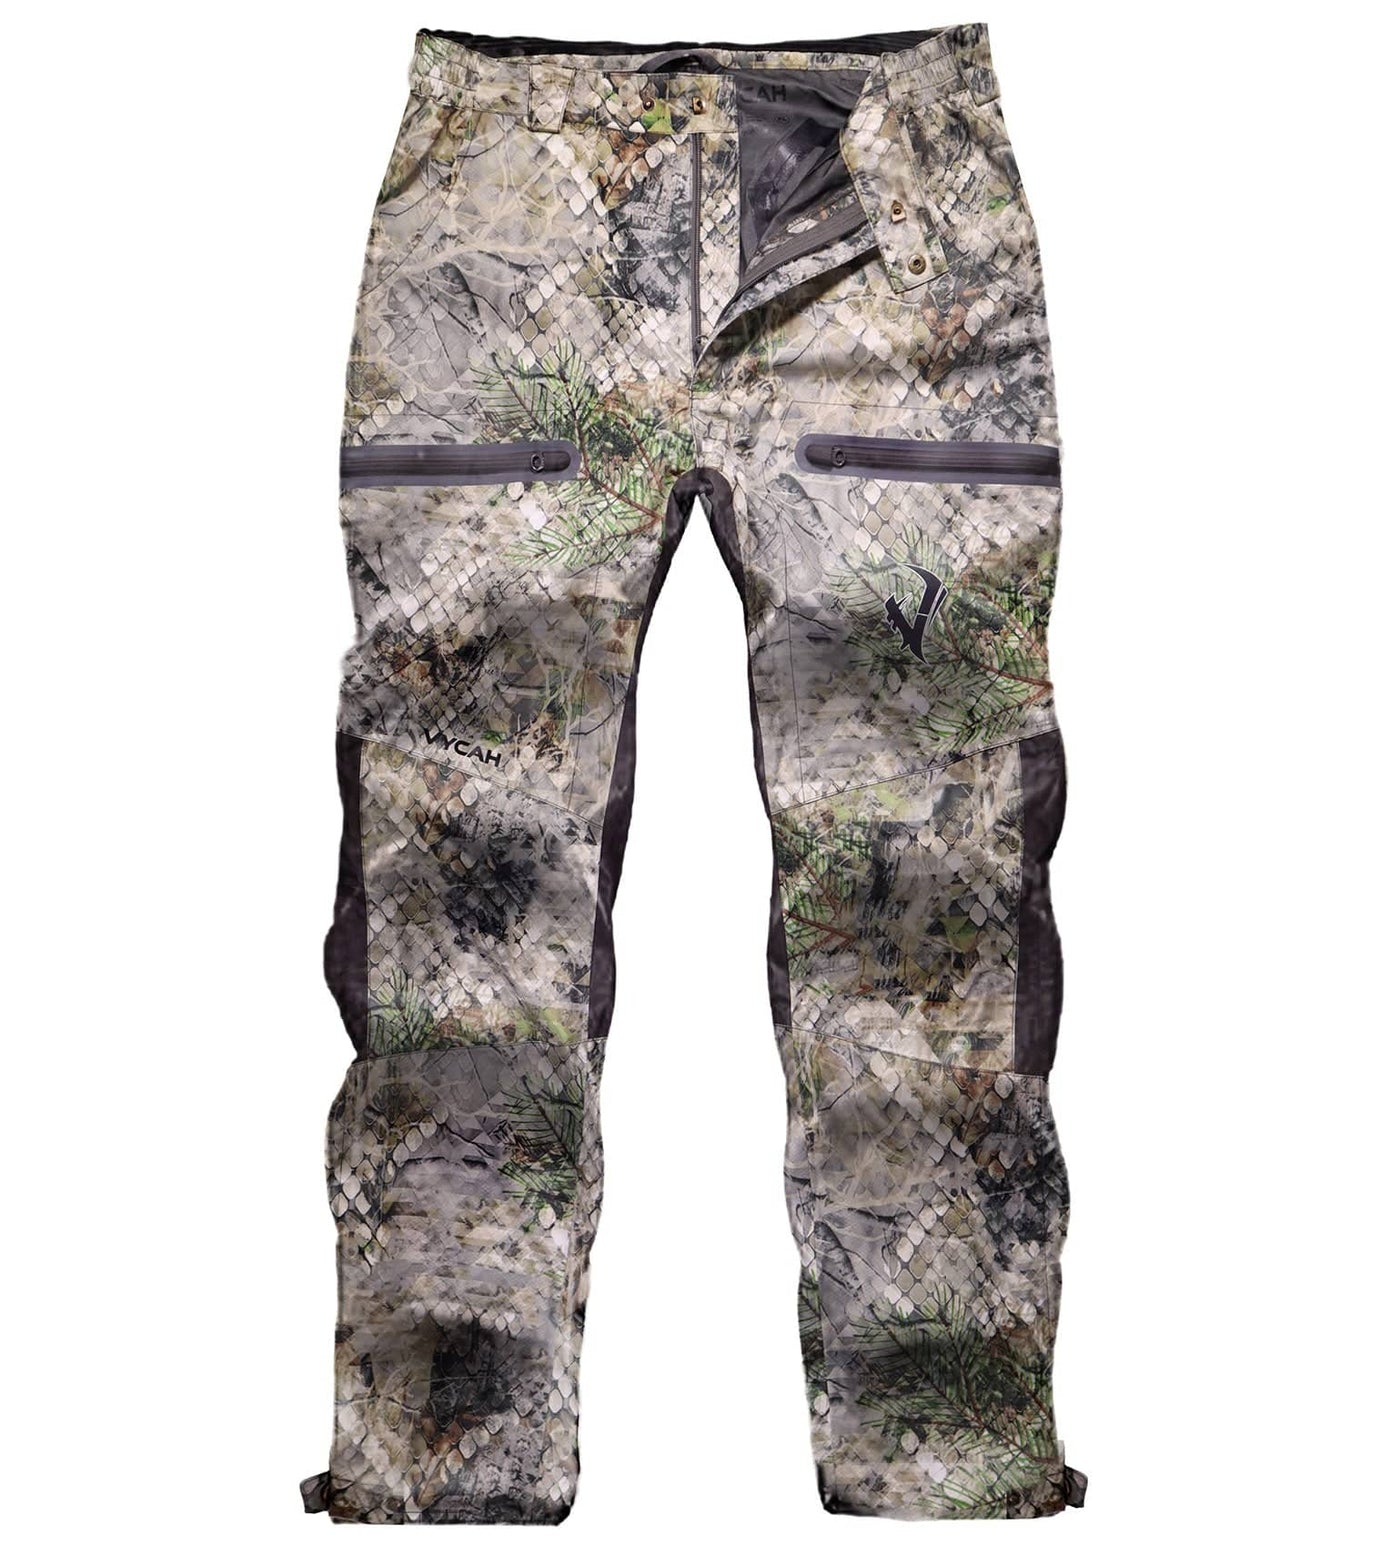 Vycah Ventral Rain Pant Front View